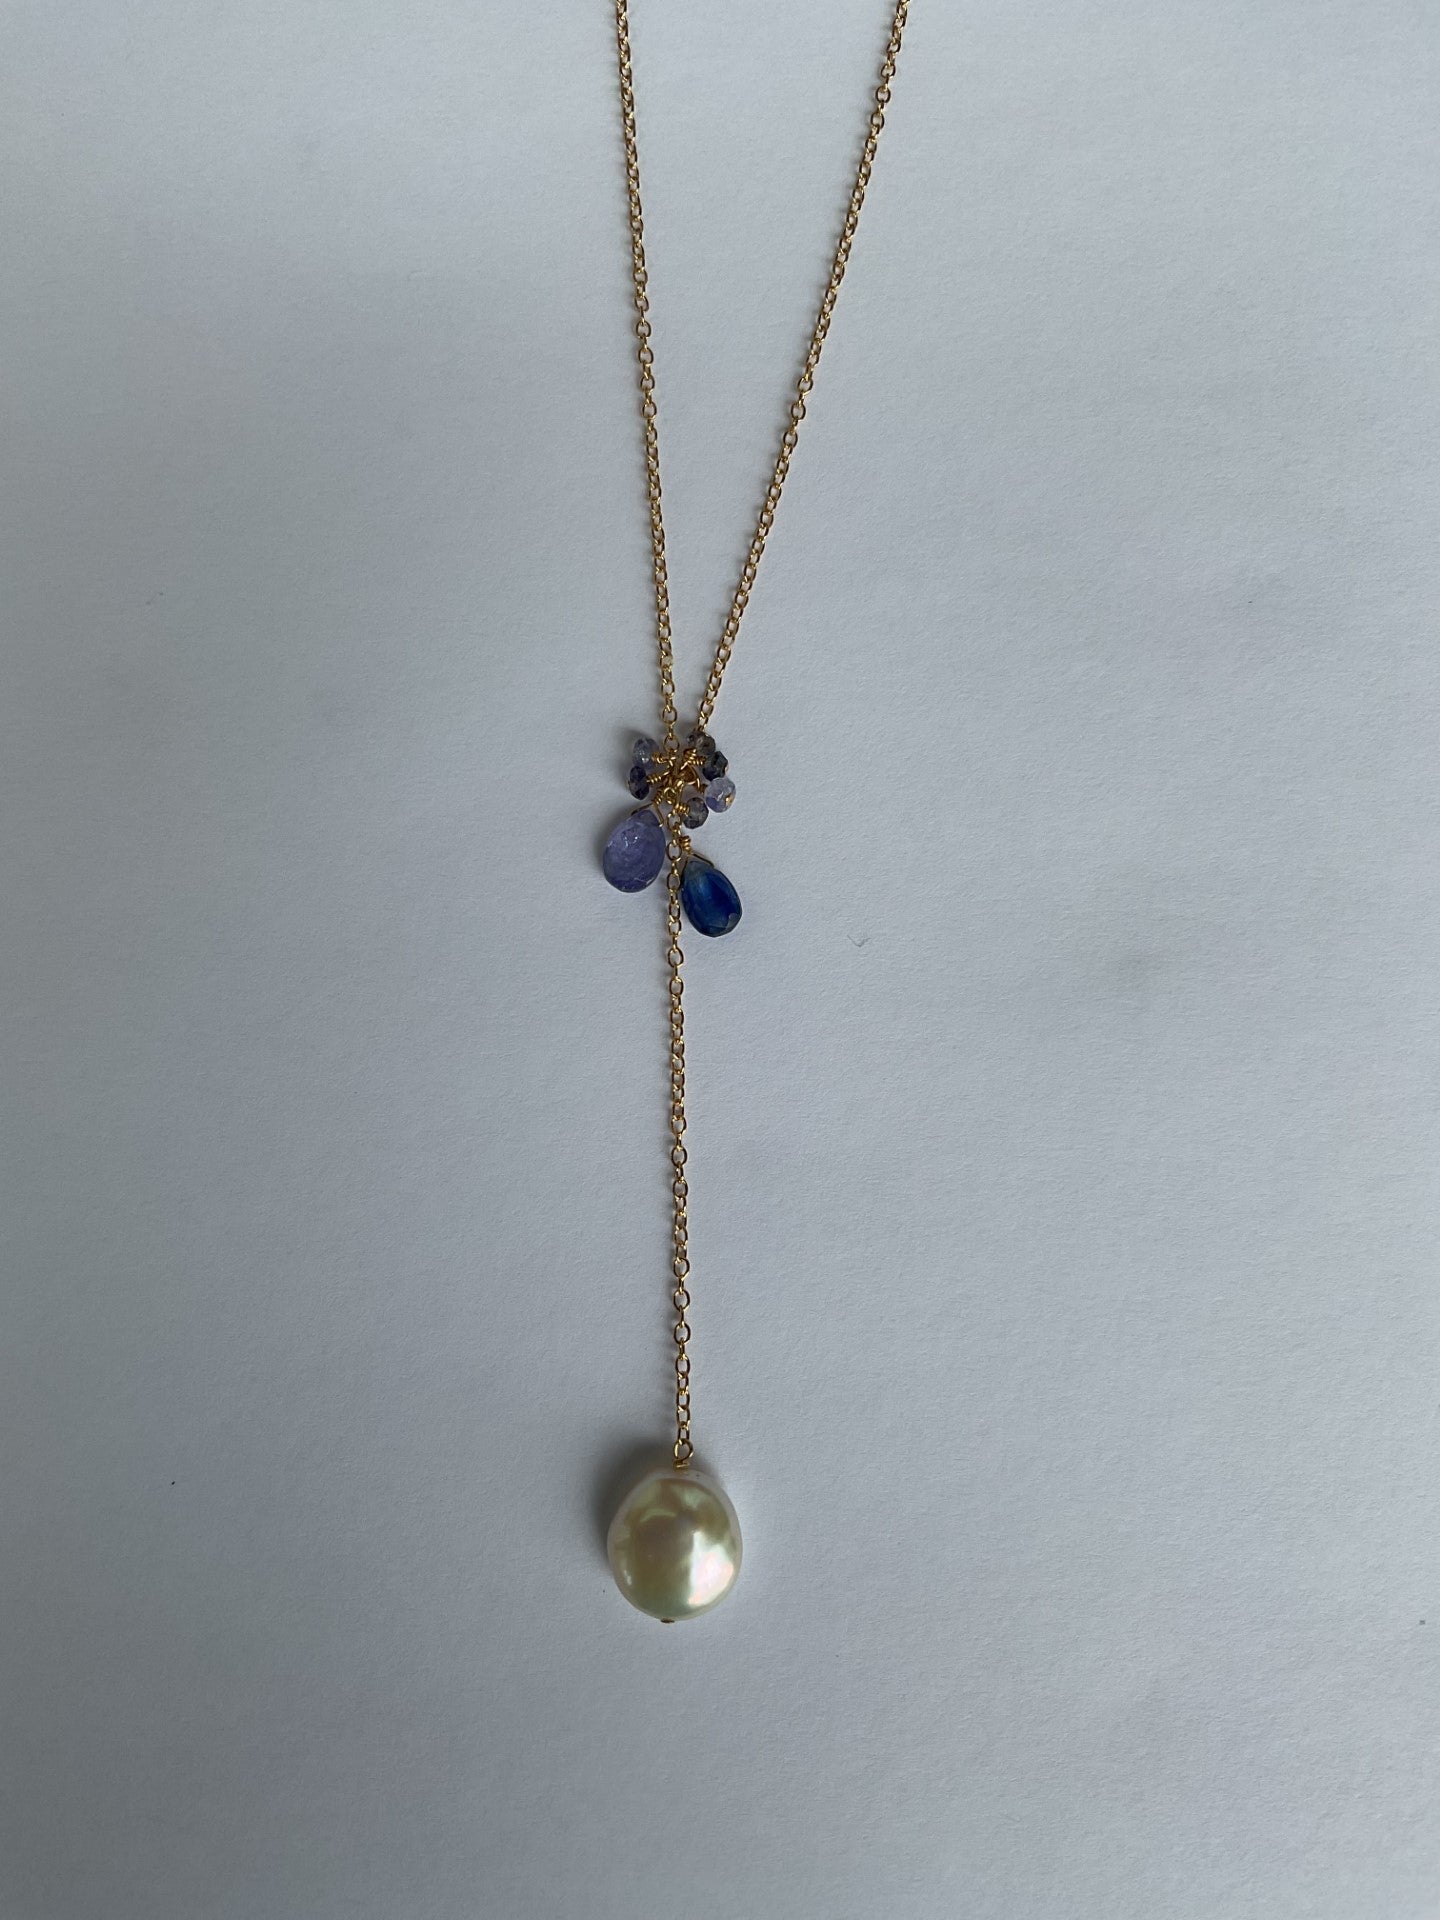 Pom Jewelry Necklace, Tanzanite, Kyanite, and Pearl set in Gold Fill